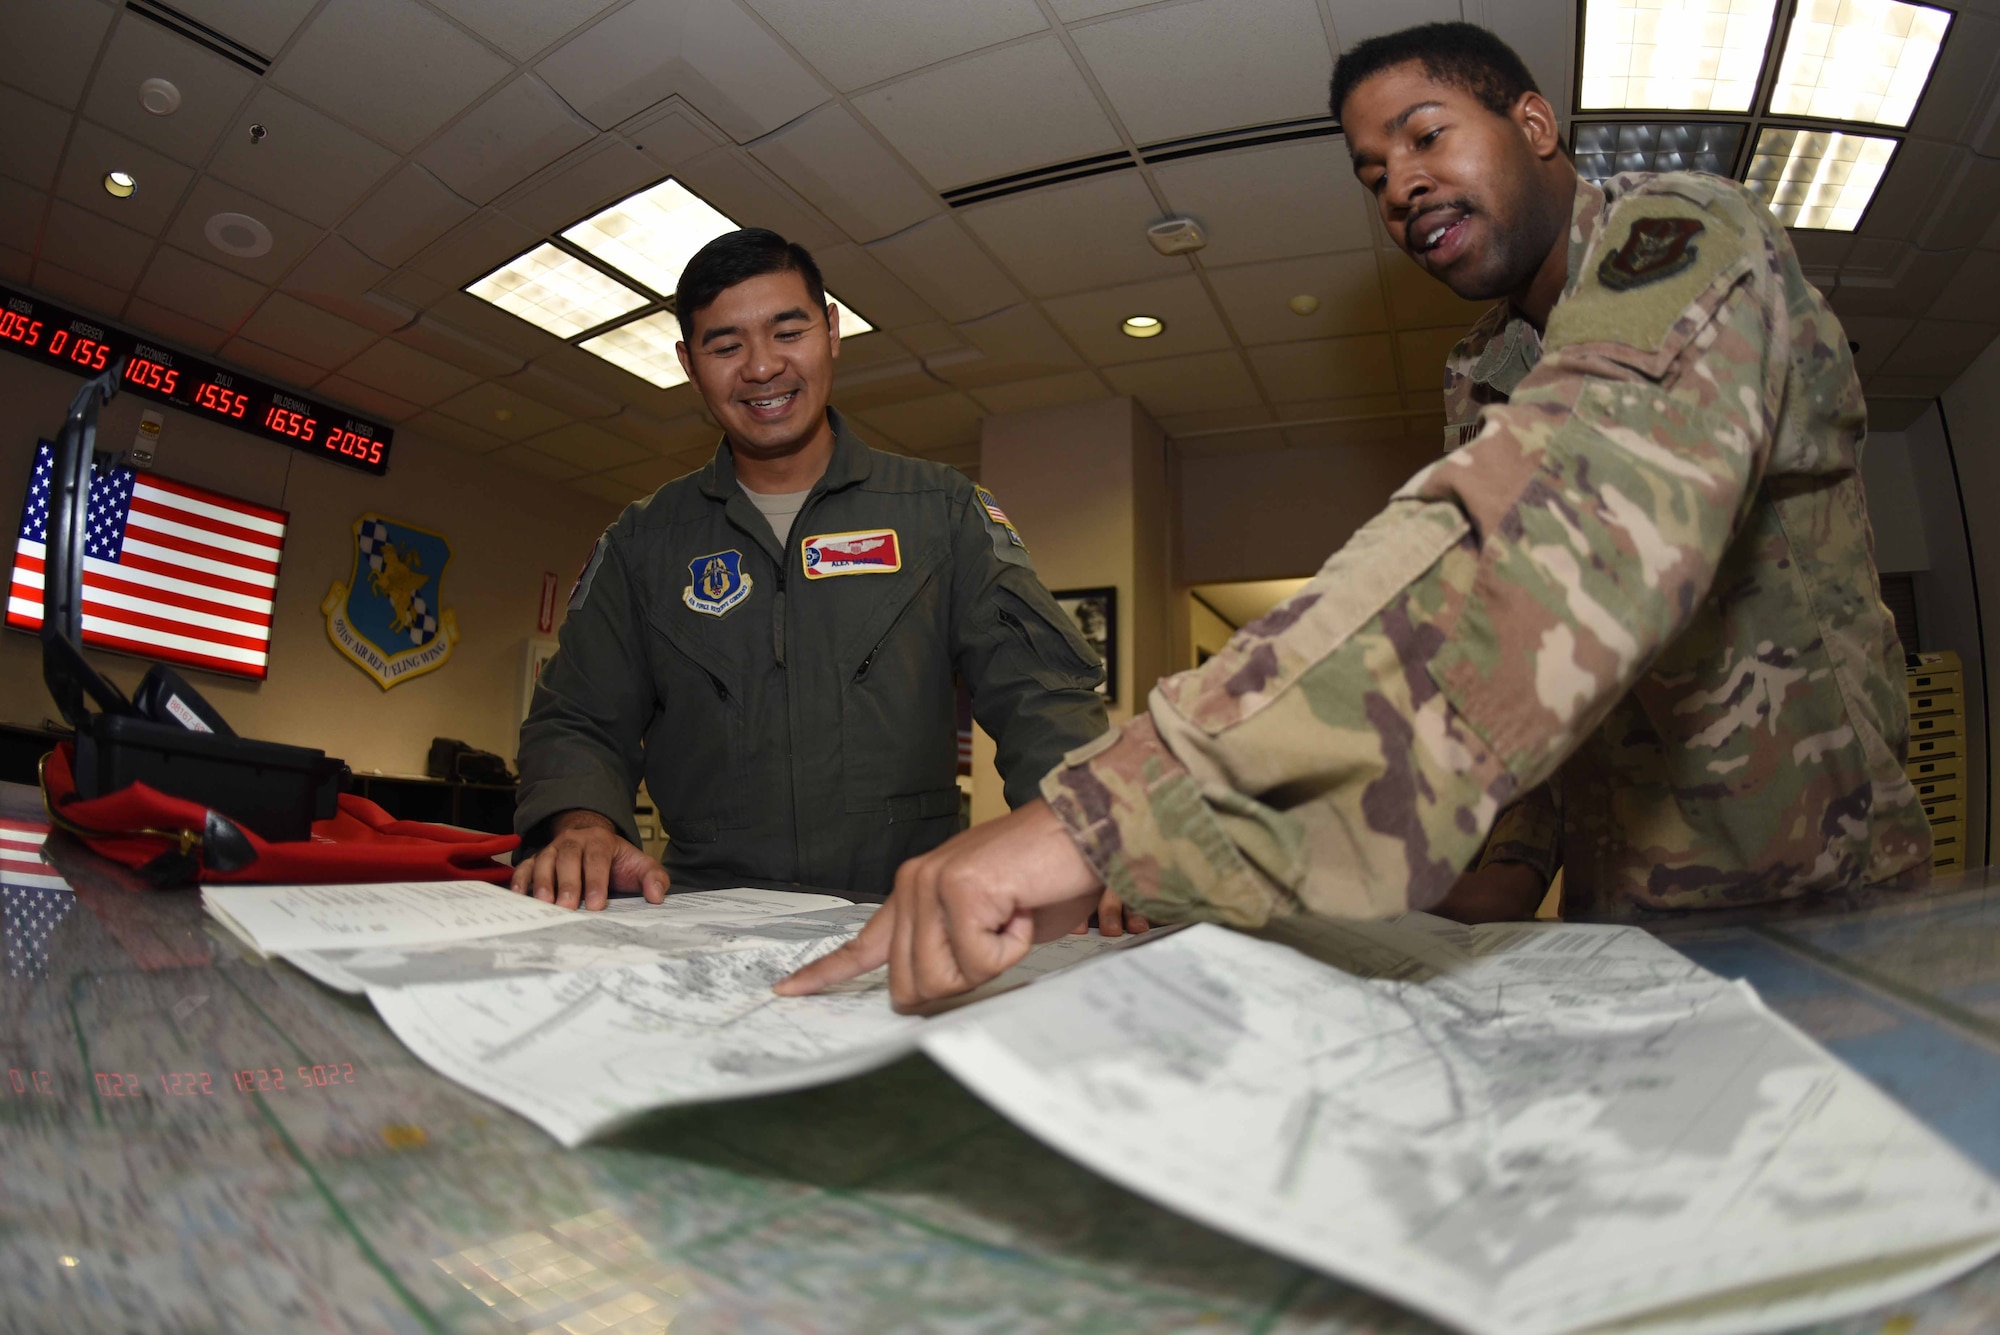 Senior Airman Dwayne Wilson, 22nd Operations Support Squadron combat crew communications technician, discusses flight plans with Maj. Alex Marana, 924th Air Refueling Squadron pilot, Oct. 30, 2019, at McConnell Air Force Base, Kan. When making flight plans, Wilson used a Flight Information Publication to show Marana the terrain data, as well as the authorized airports. (U.S. Air Force photo by Airman 1st Class Alexi Bosarge)